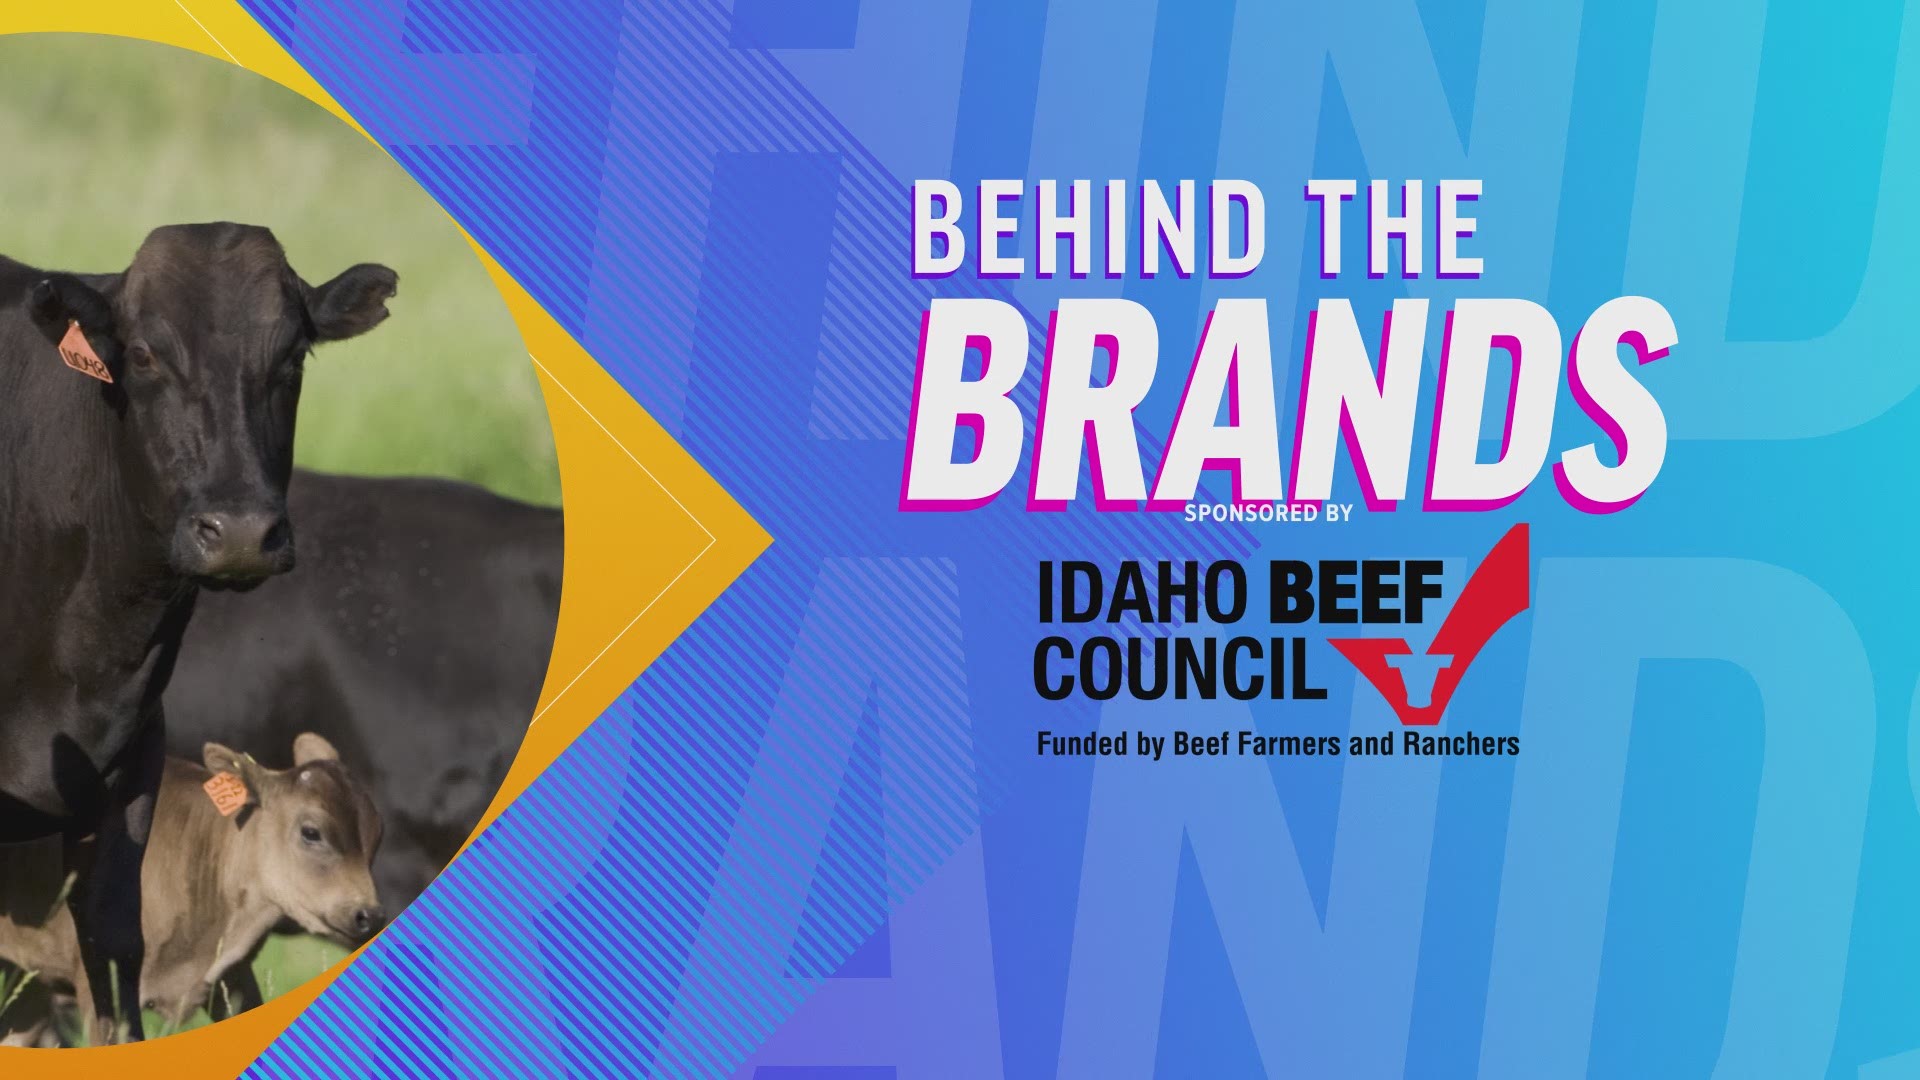 You've bought the beef, but who are the people who help put it on our table? Sponsored by Idaho Beef Council.